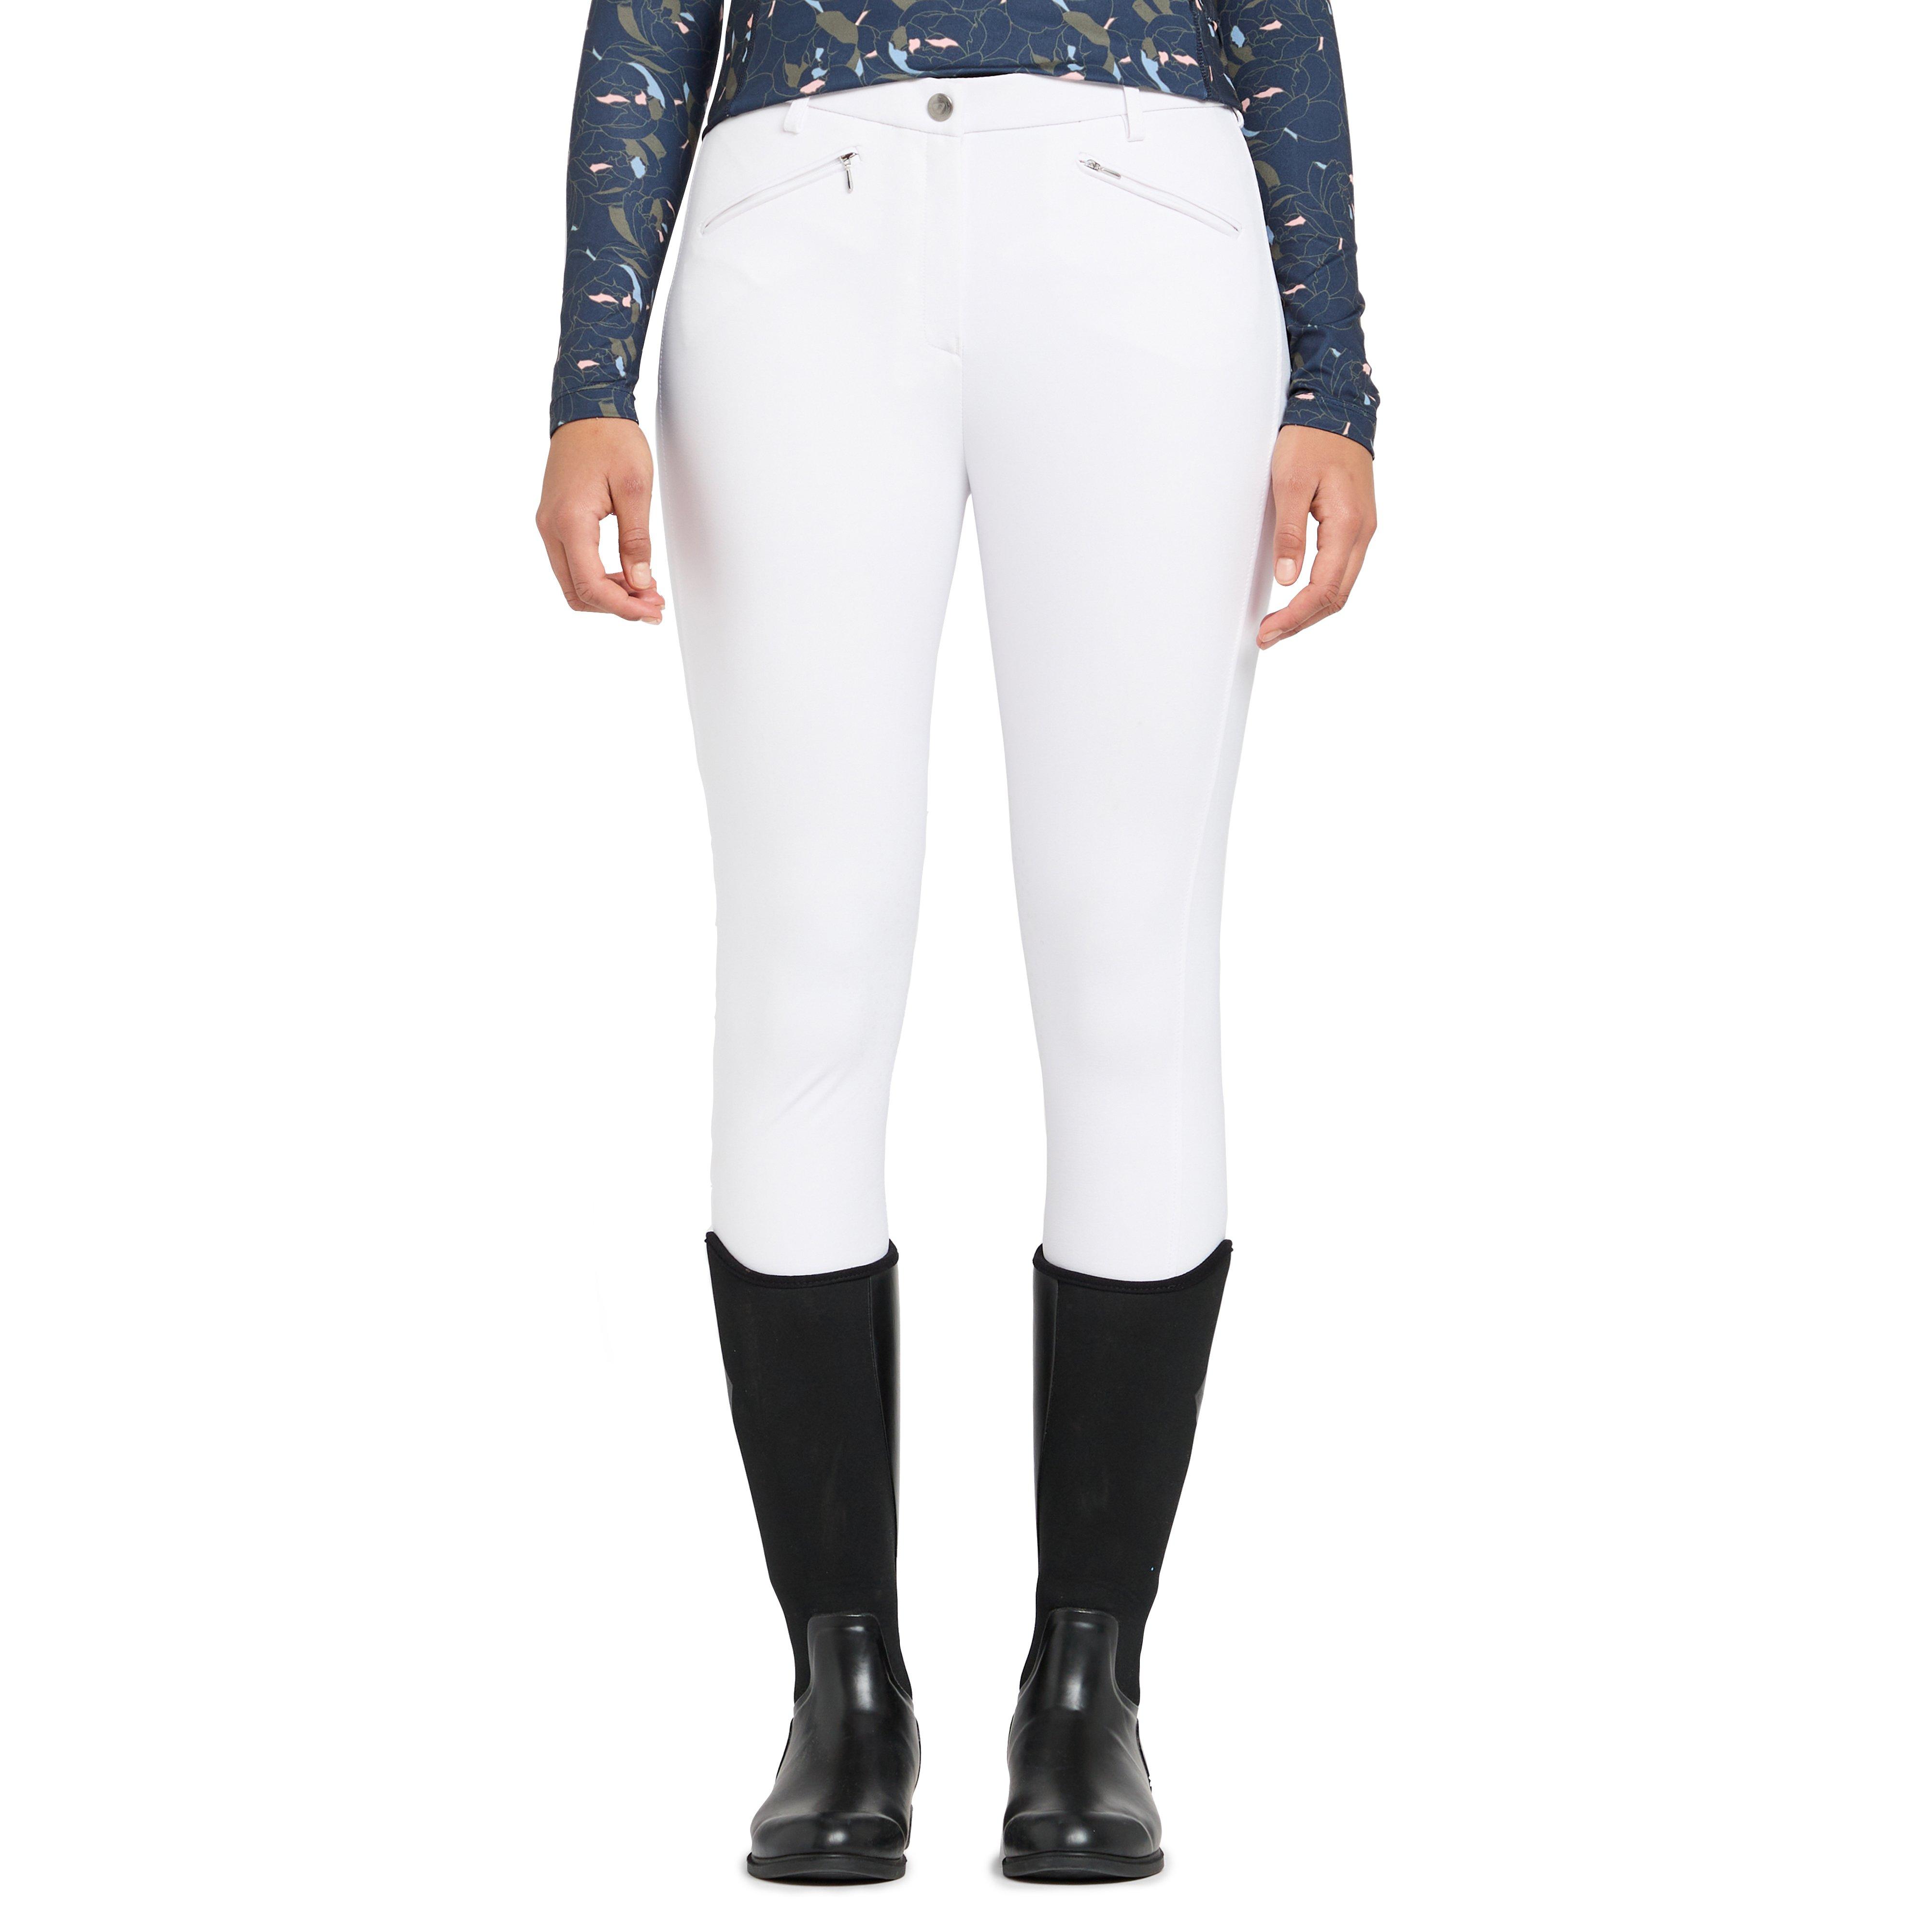 Womens Thompson Knee Patch Breeches White